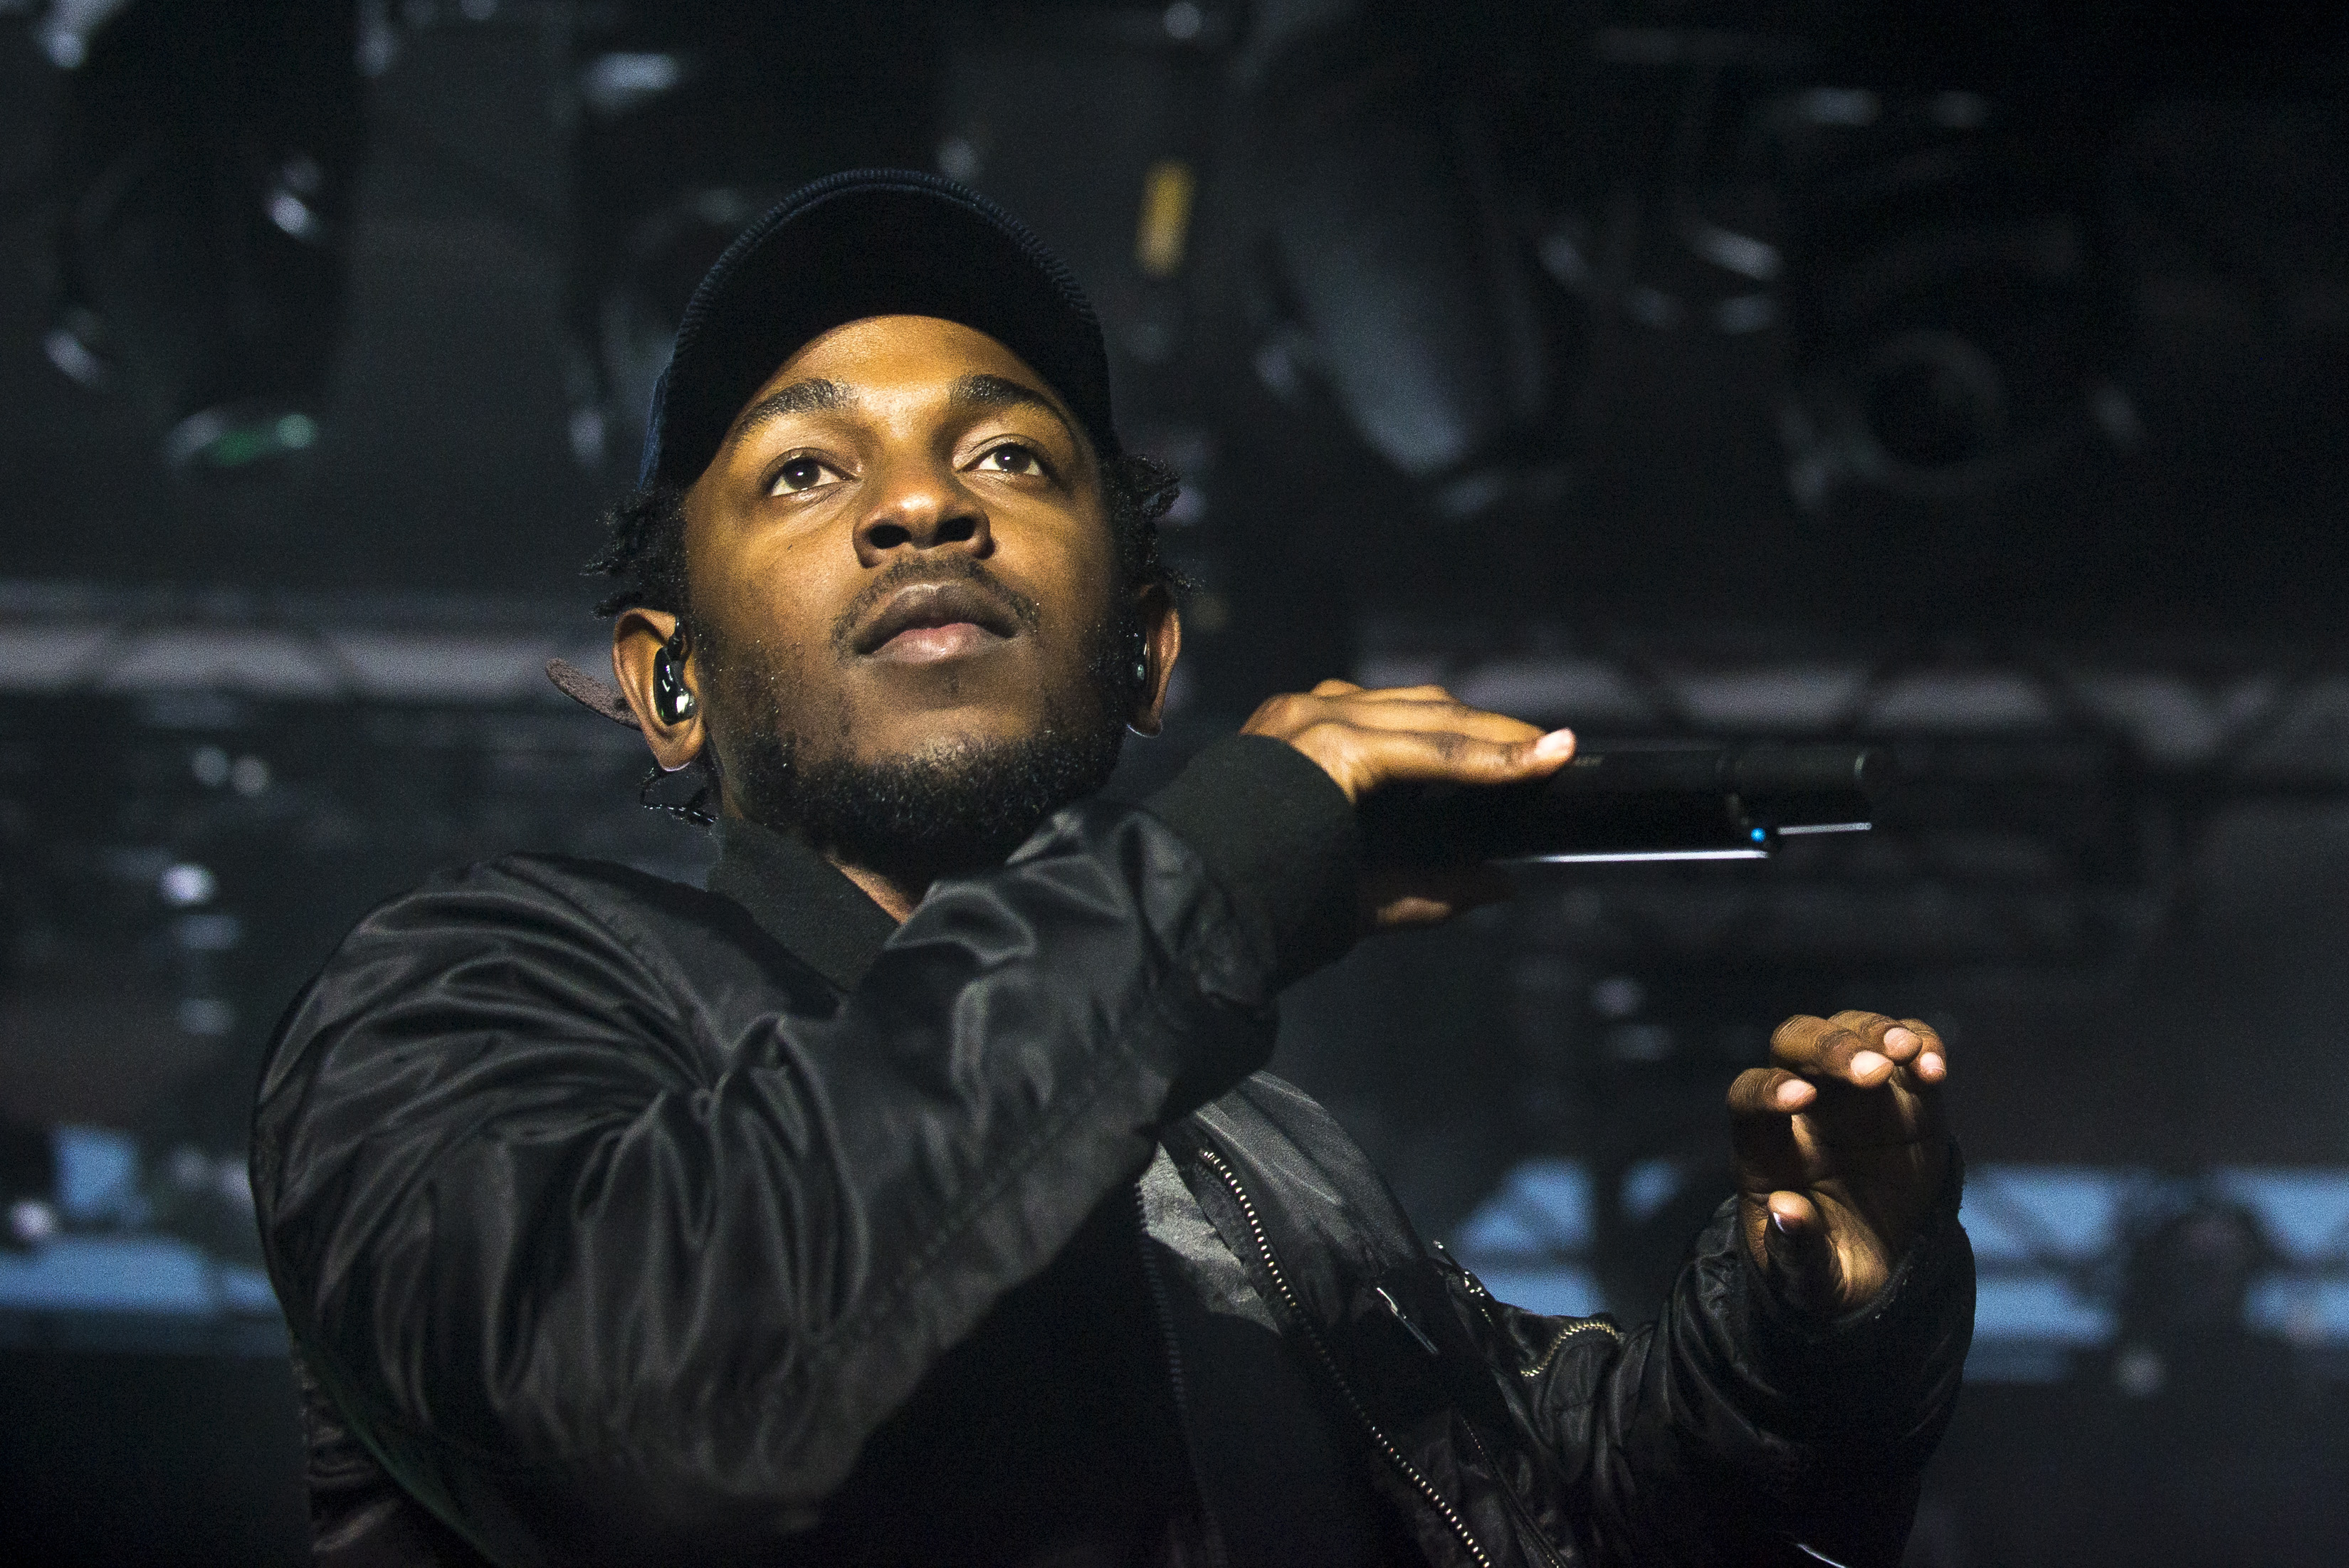 Kendrick Lamar performs during the Cleveland Cavaliers &amp; Turner Sports Home Opener Fan Fest on Oct. 30, 2014 in Cleveland, Ohio. (Angelo Merendino&mdash;Getty Images)